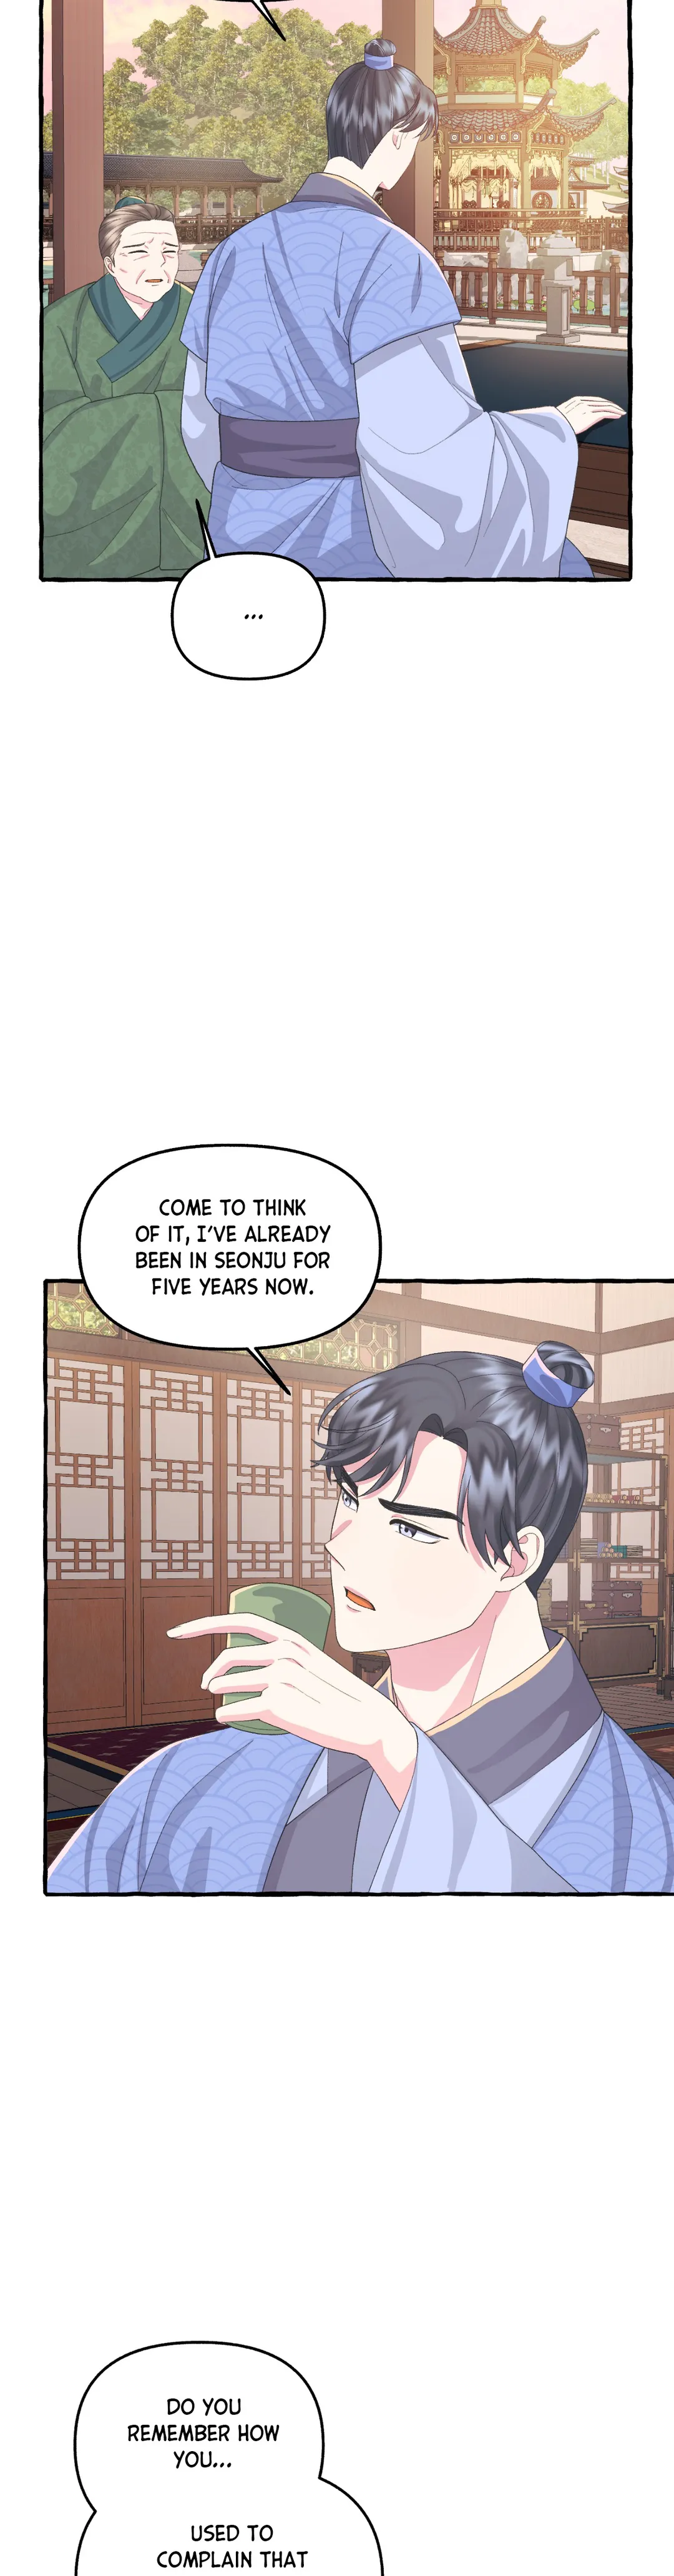 Cheer Up, Your Highness! chapter 21